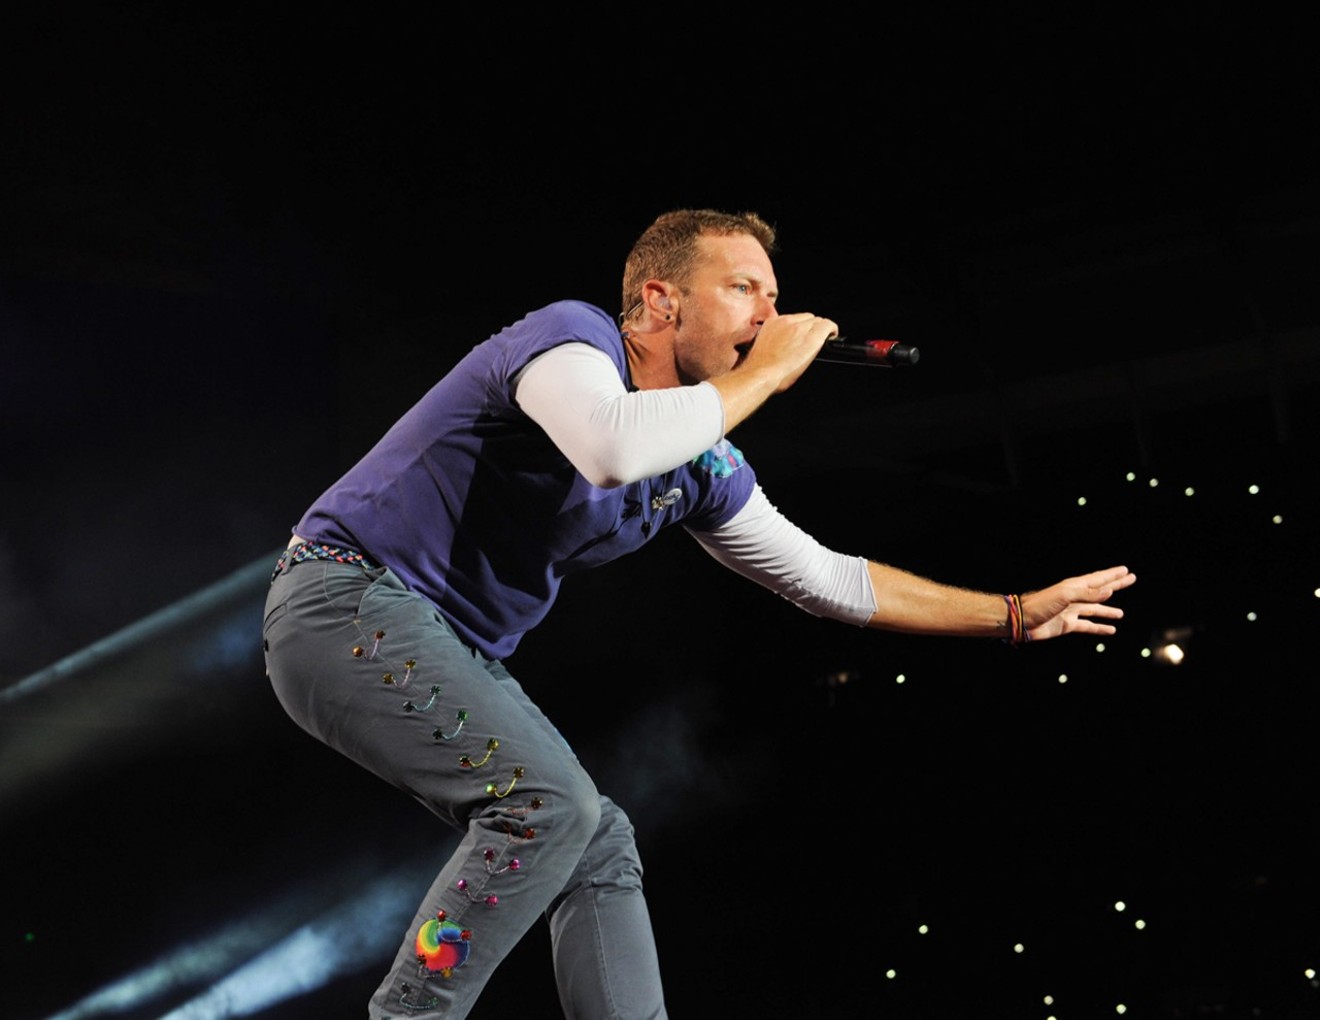 See more photos from Coldplay's sold-out show at Hard Rock Stadium.